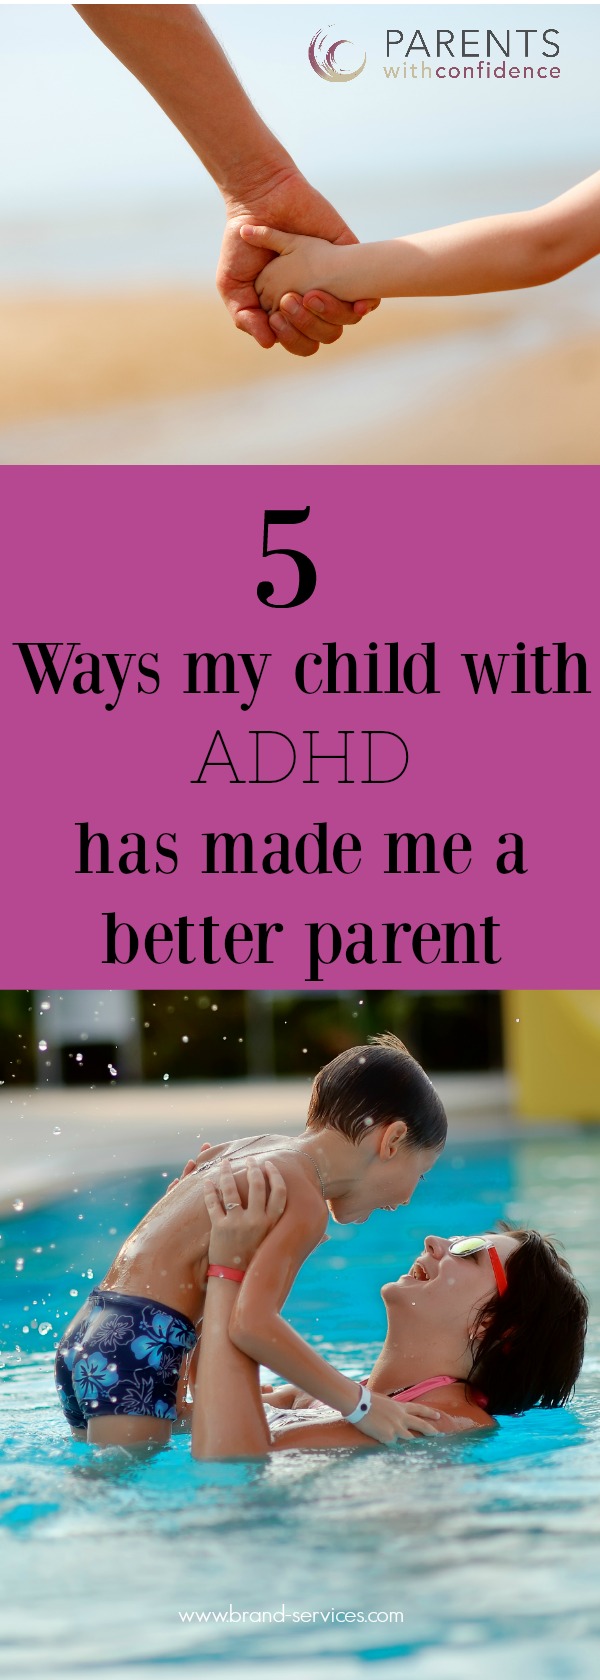 parenting a child with ADHD